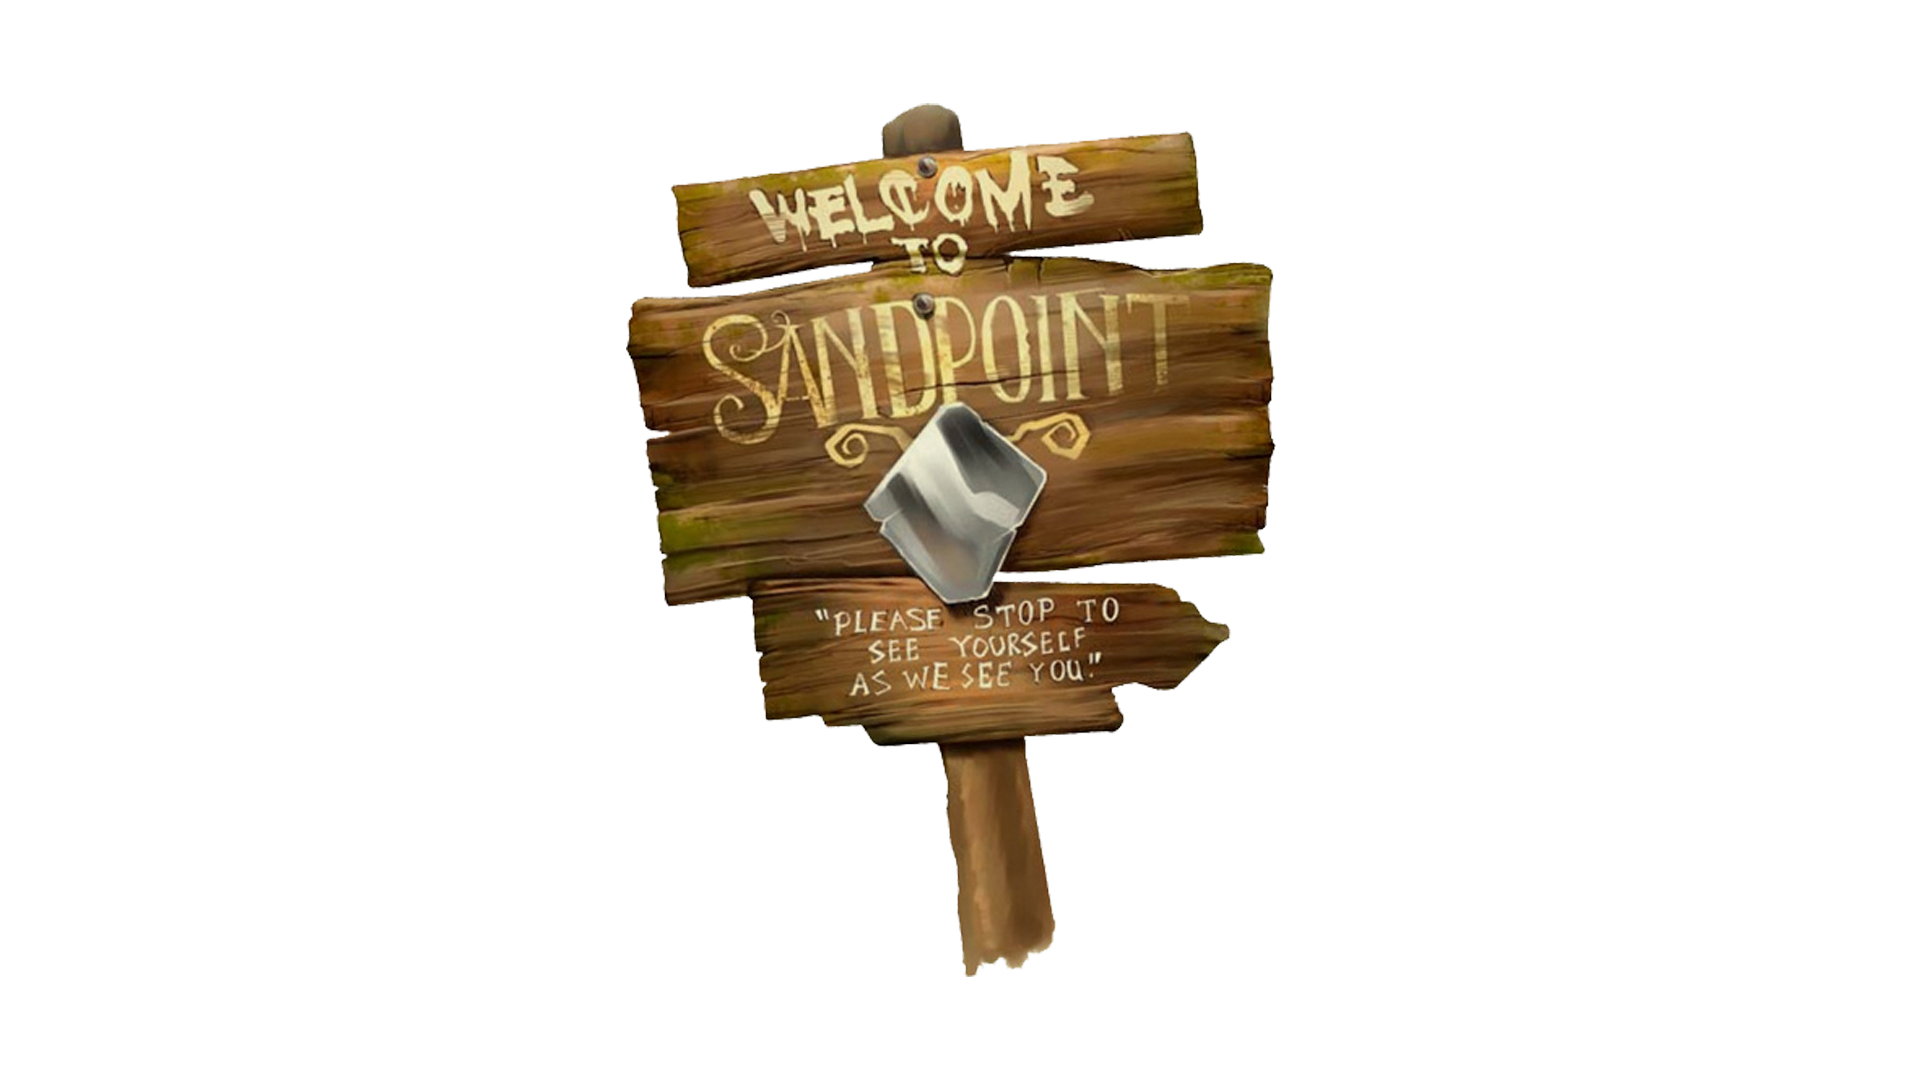 Spot art of a wooden signpost with a mirror attached to it. The sign reads: Welcome to Sandpoint. Please stop to see yourself as we see you.